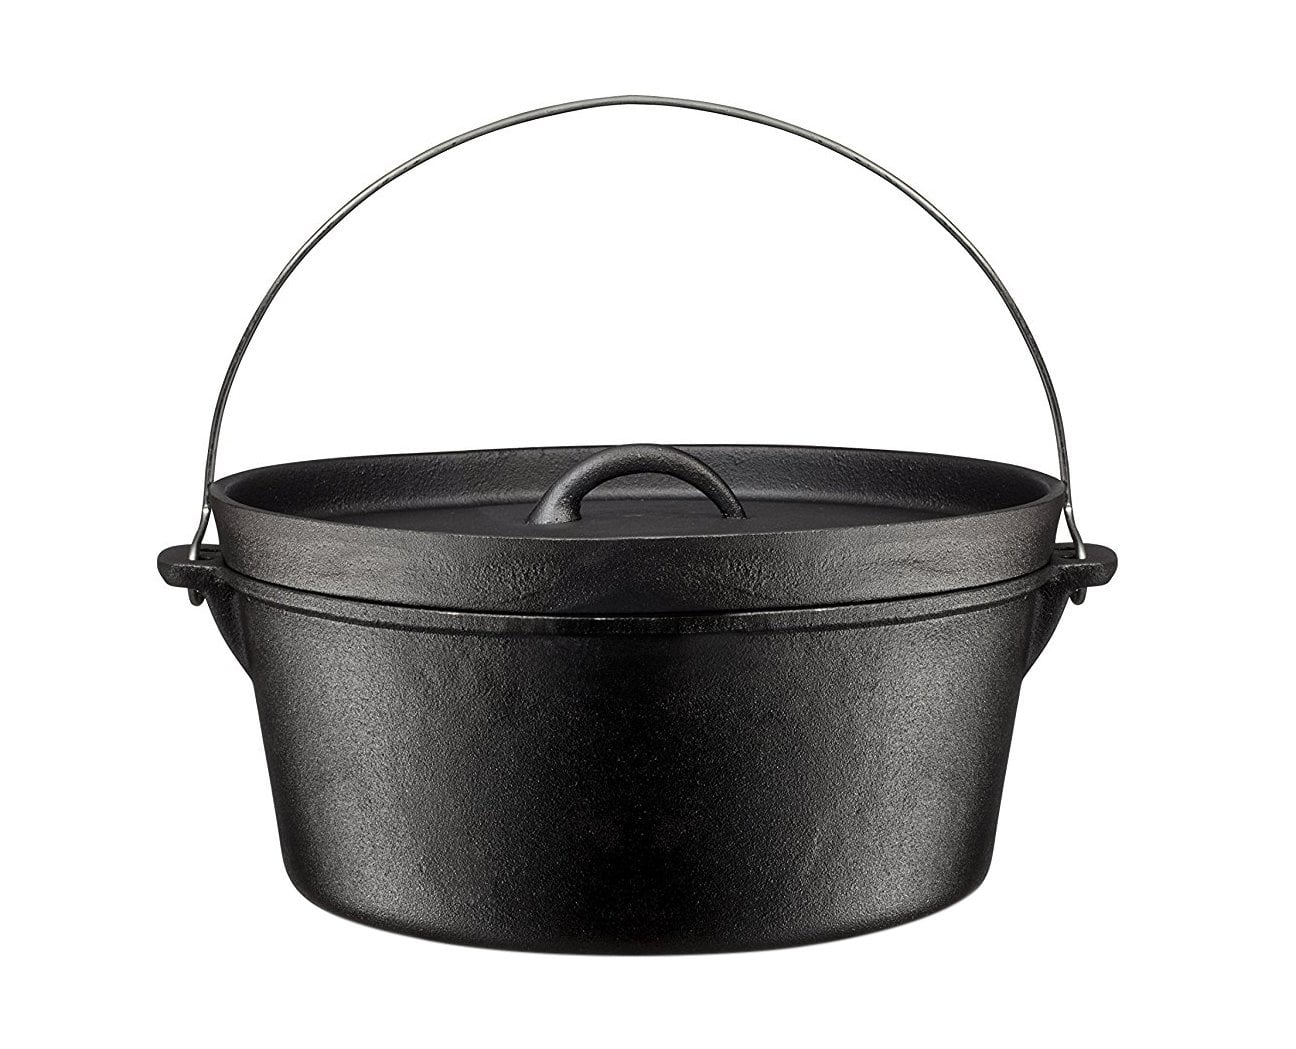 Potjie Pot/Dutch Oven Carrier - by Front Runner